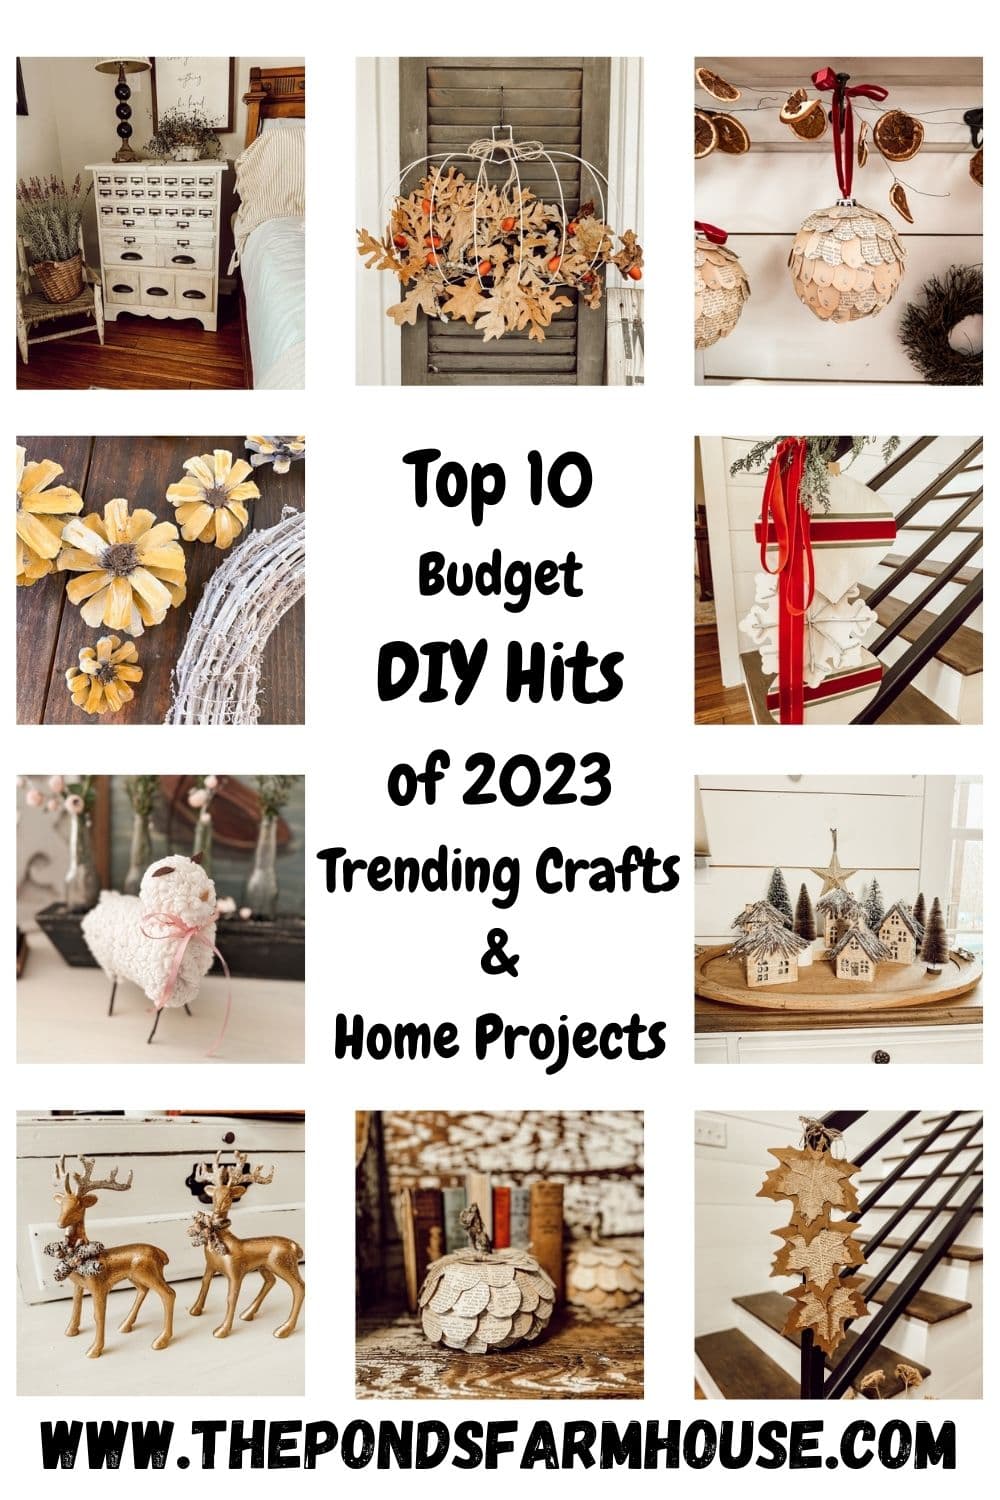 DIY Home Decor Crafts to Try on a Budget